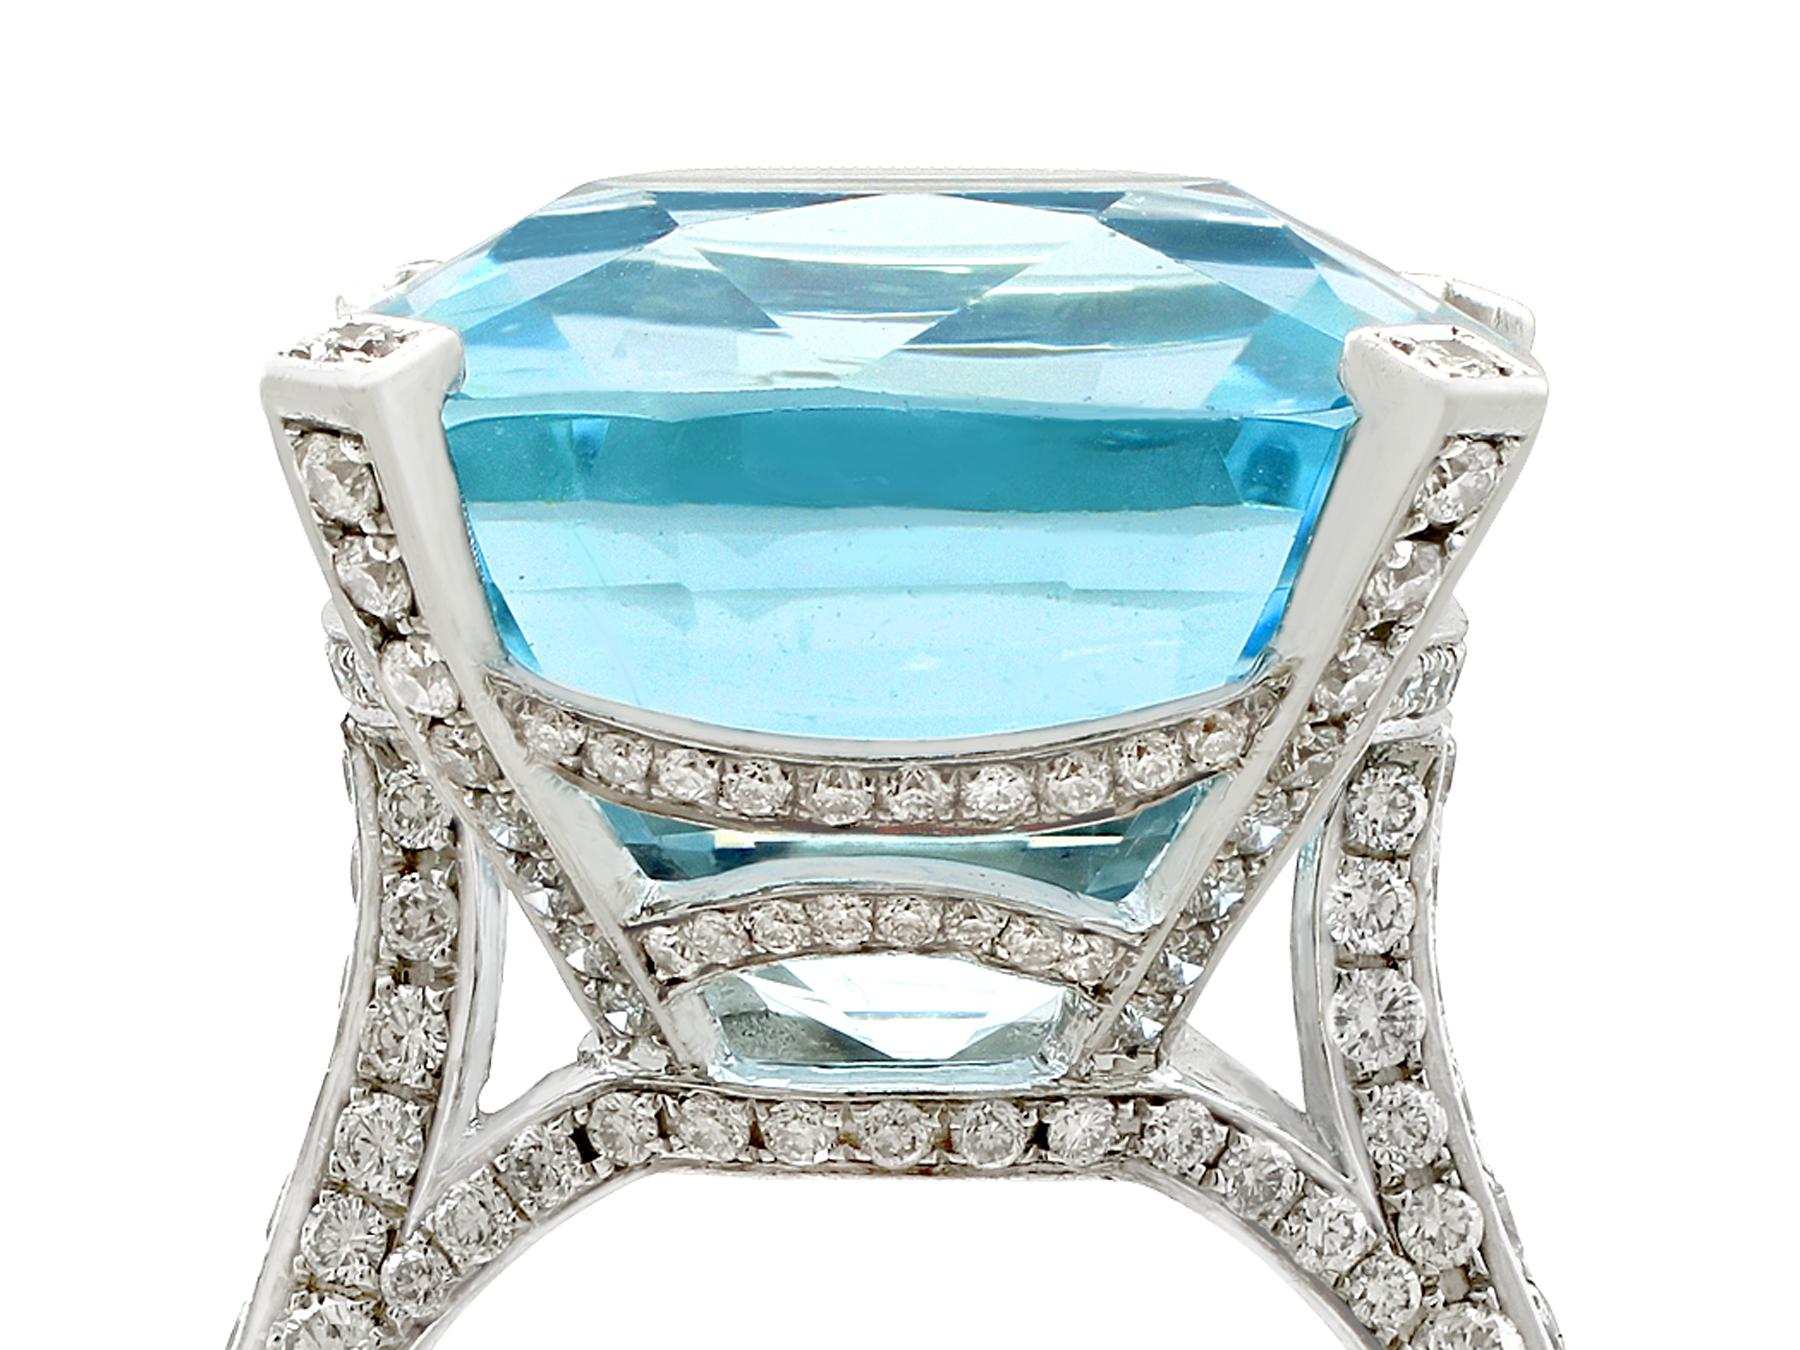 A stunning vintage 1990s 25.61 carat aquamarine and 3.02 carat diamond, 18 karat white gold cocktail ring; part of our diverse gemstone jewelry and estate jewelry collections.

This stunning, fine and impressive large aquamarine cocktail ring has